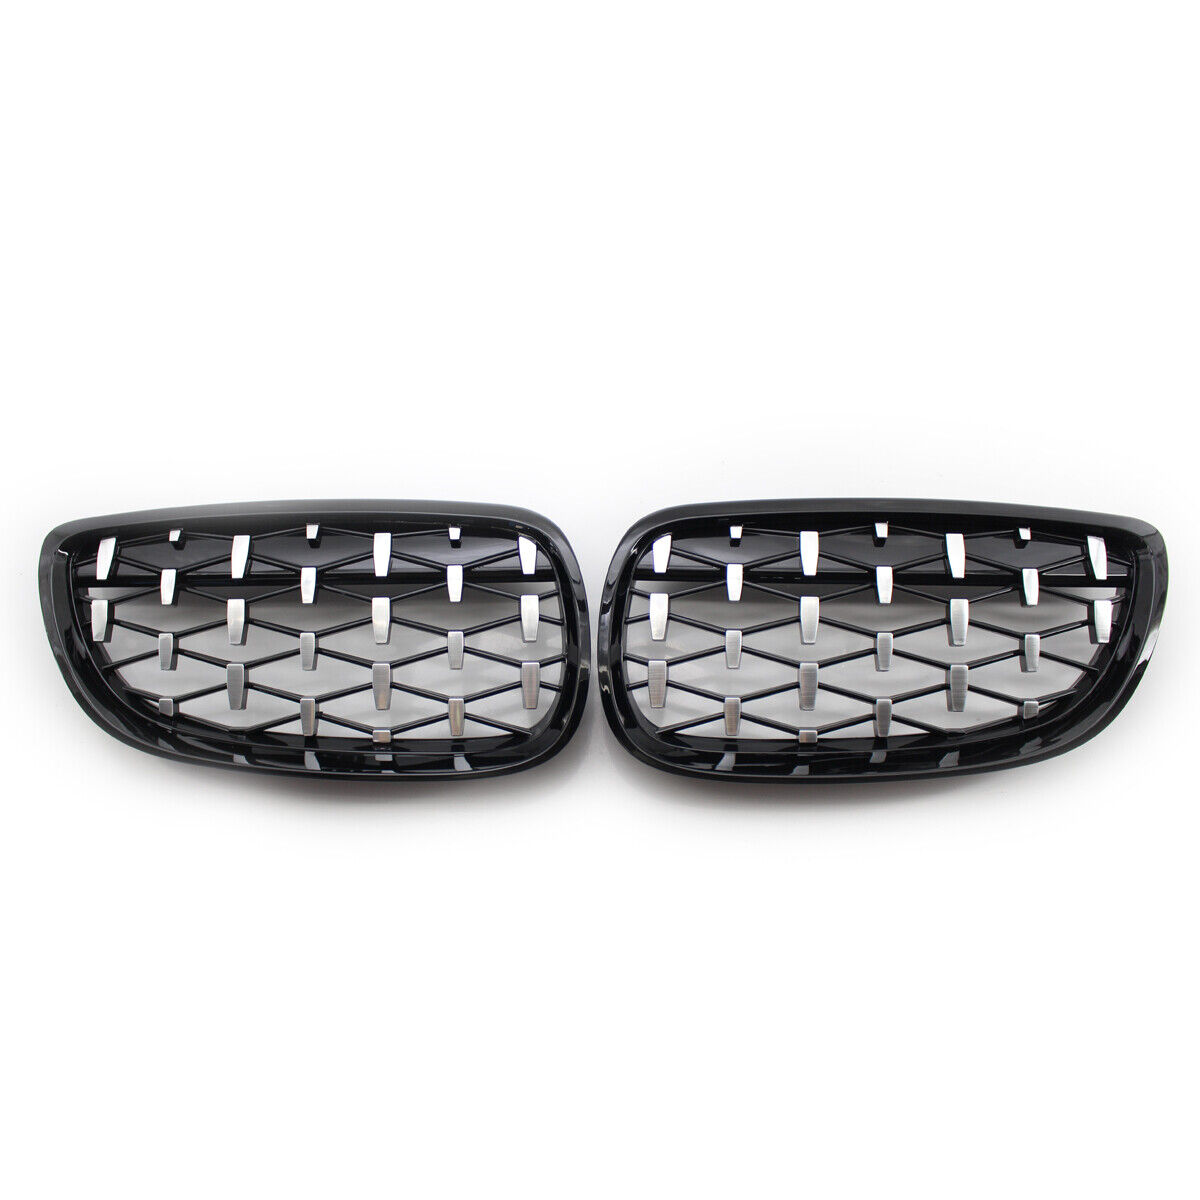 Front Kidney Diamond Grill Grille For BMW E92 E93 M3 328i 335i Coupe 2006-2009